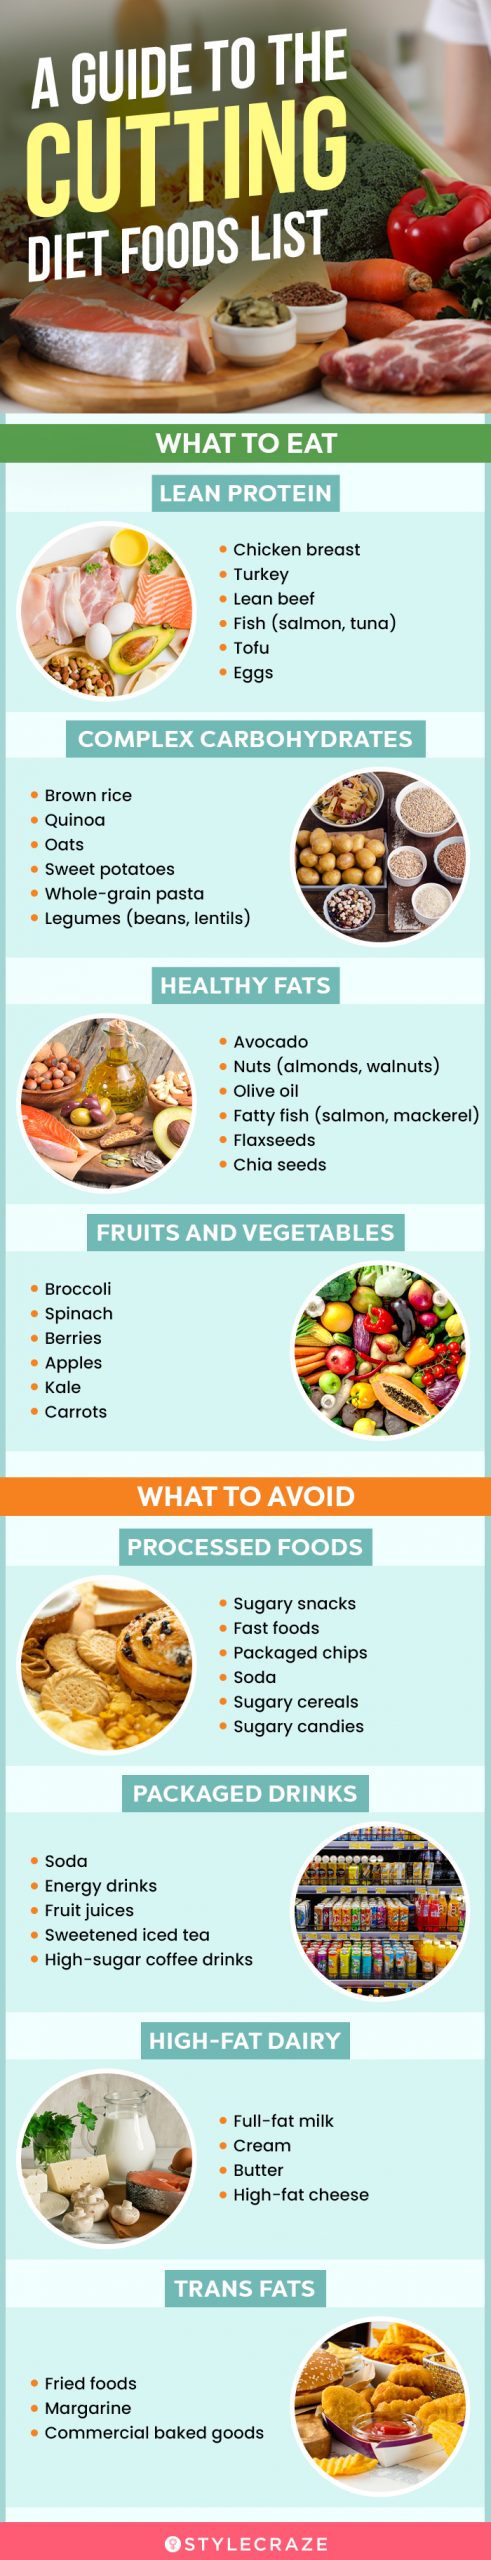 a guide to the cutting diet foods list (infographic)